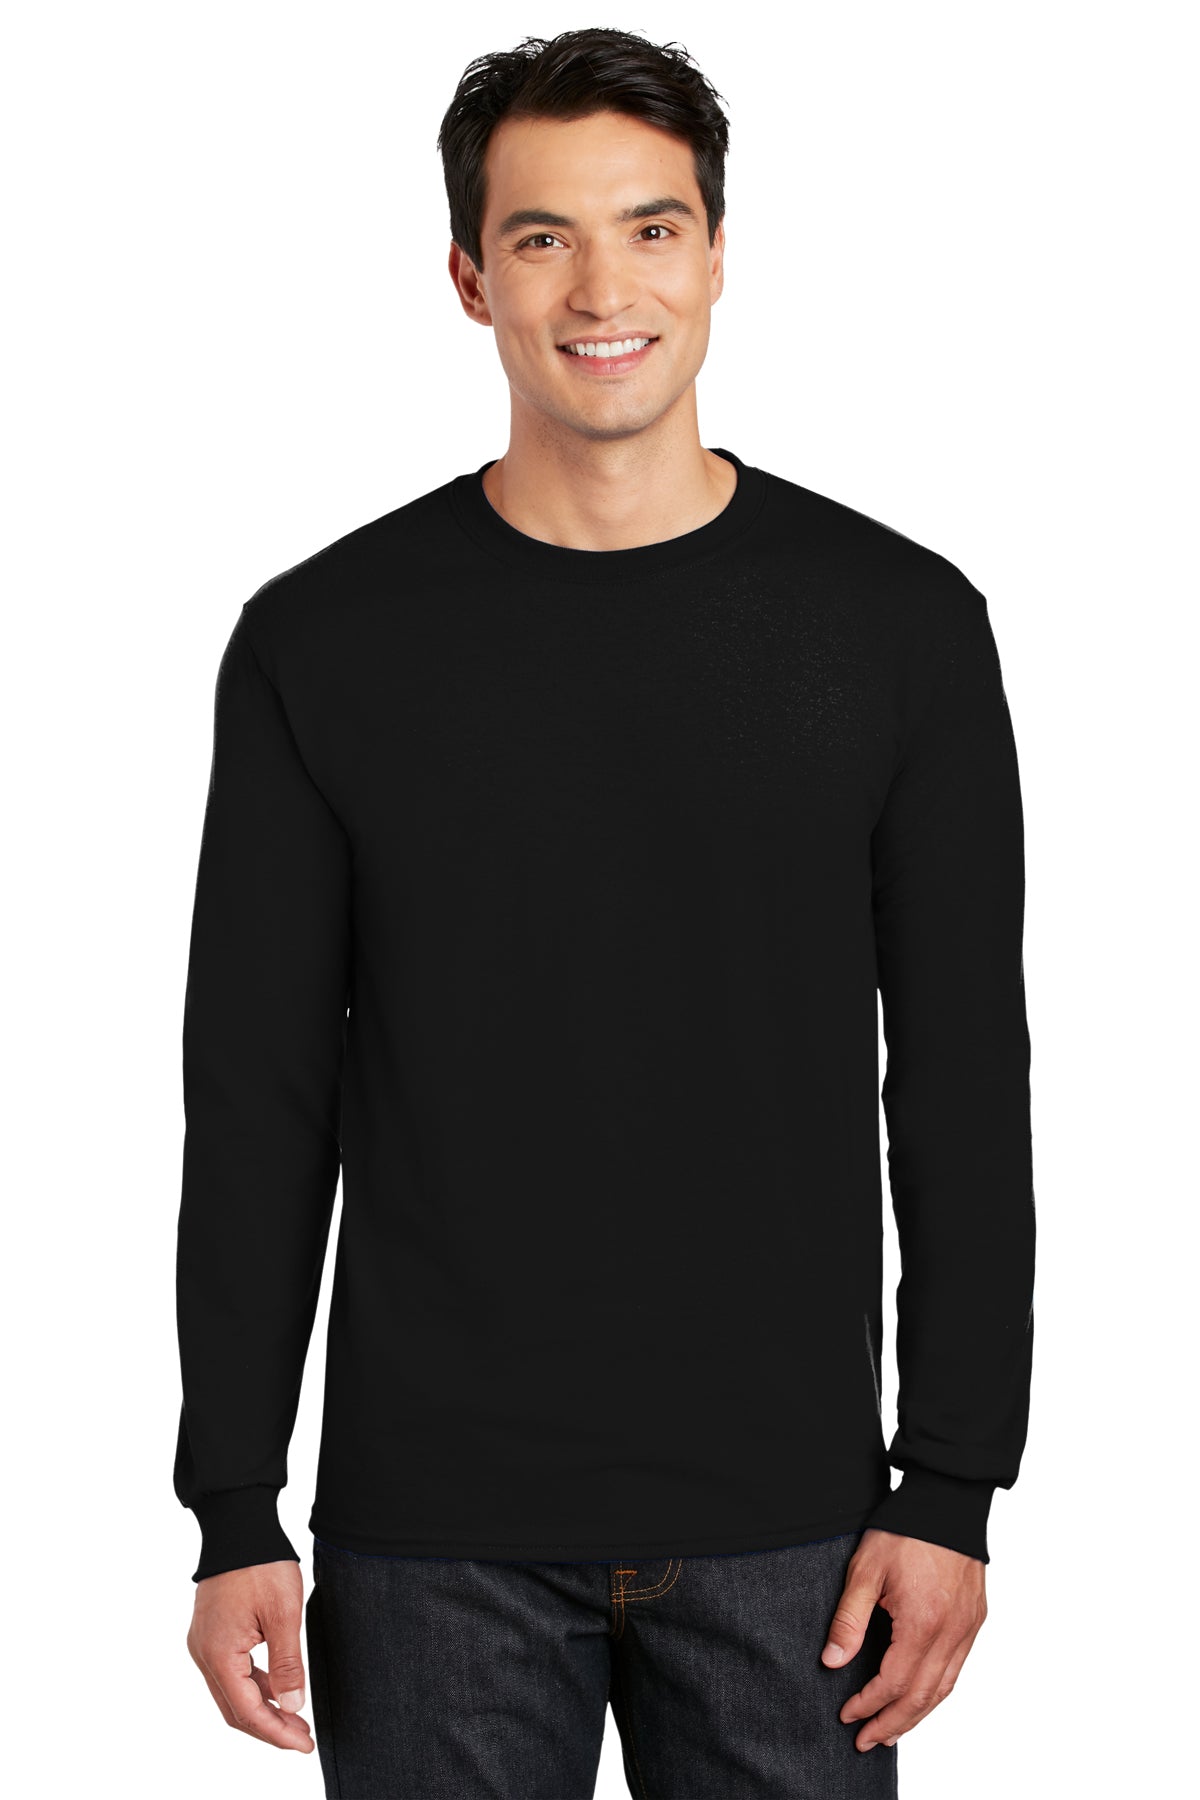 Give Me a T - Two Color - LONG SLEEVE Tee